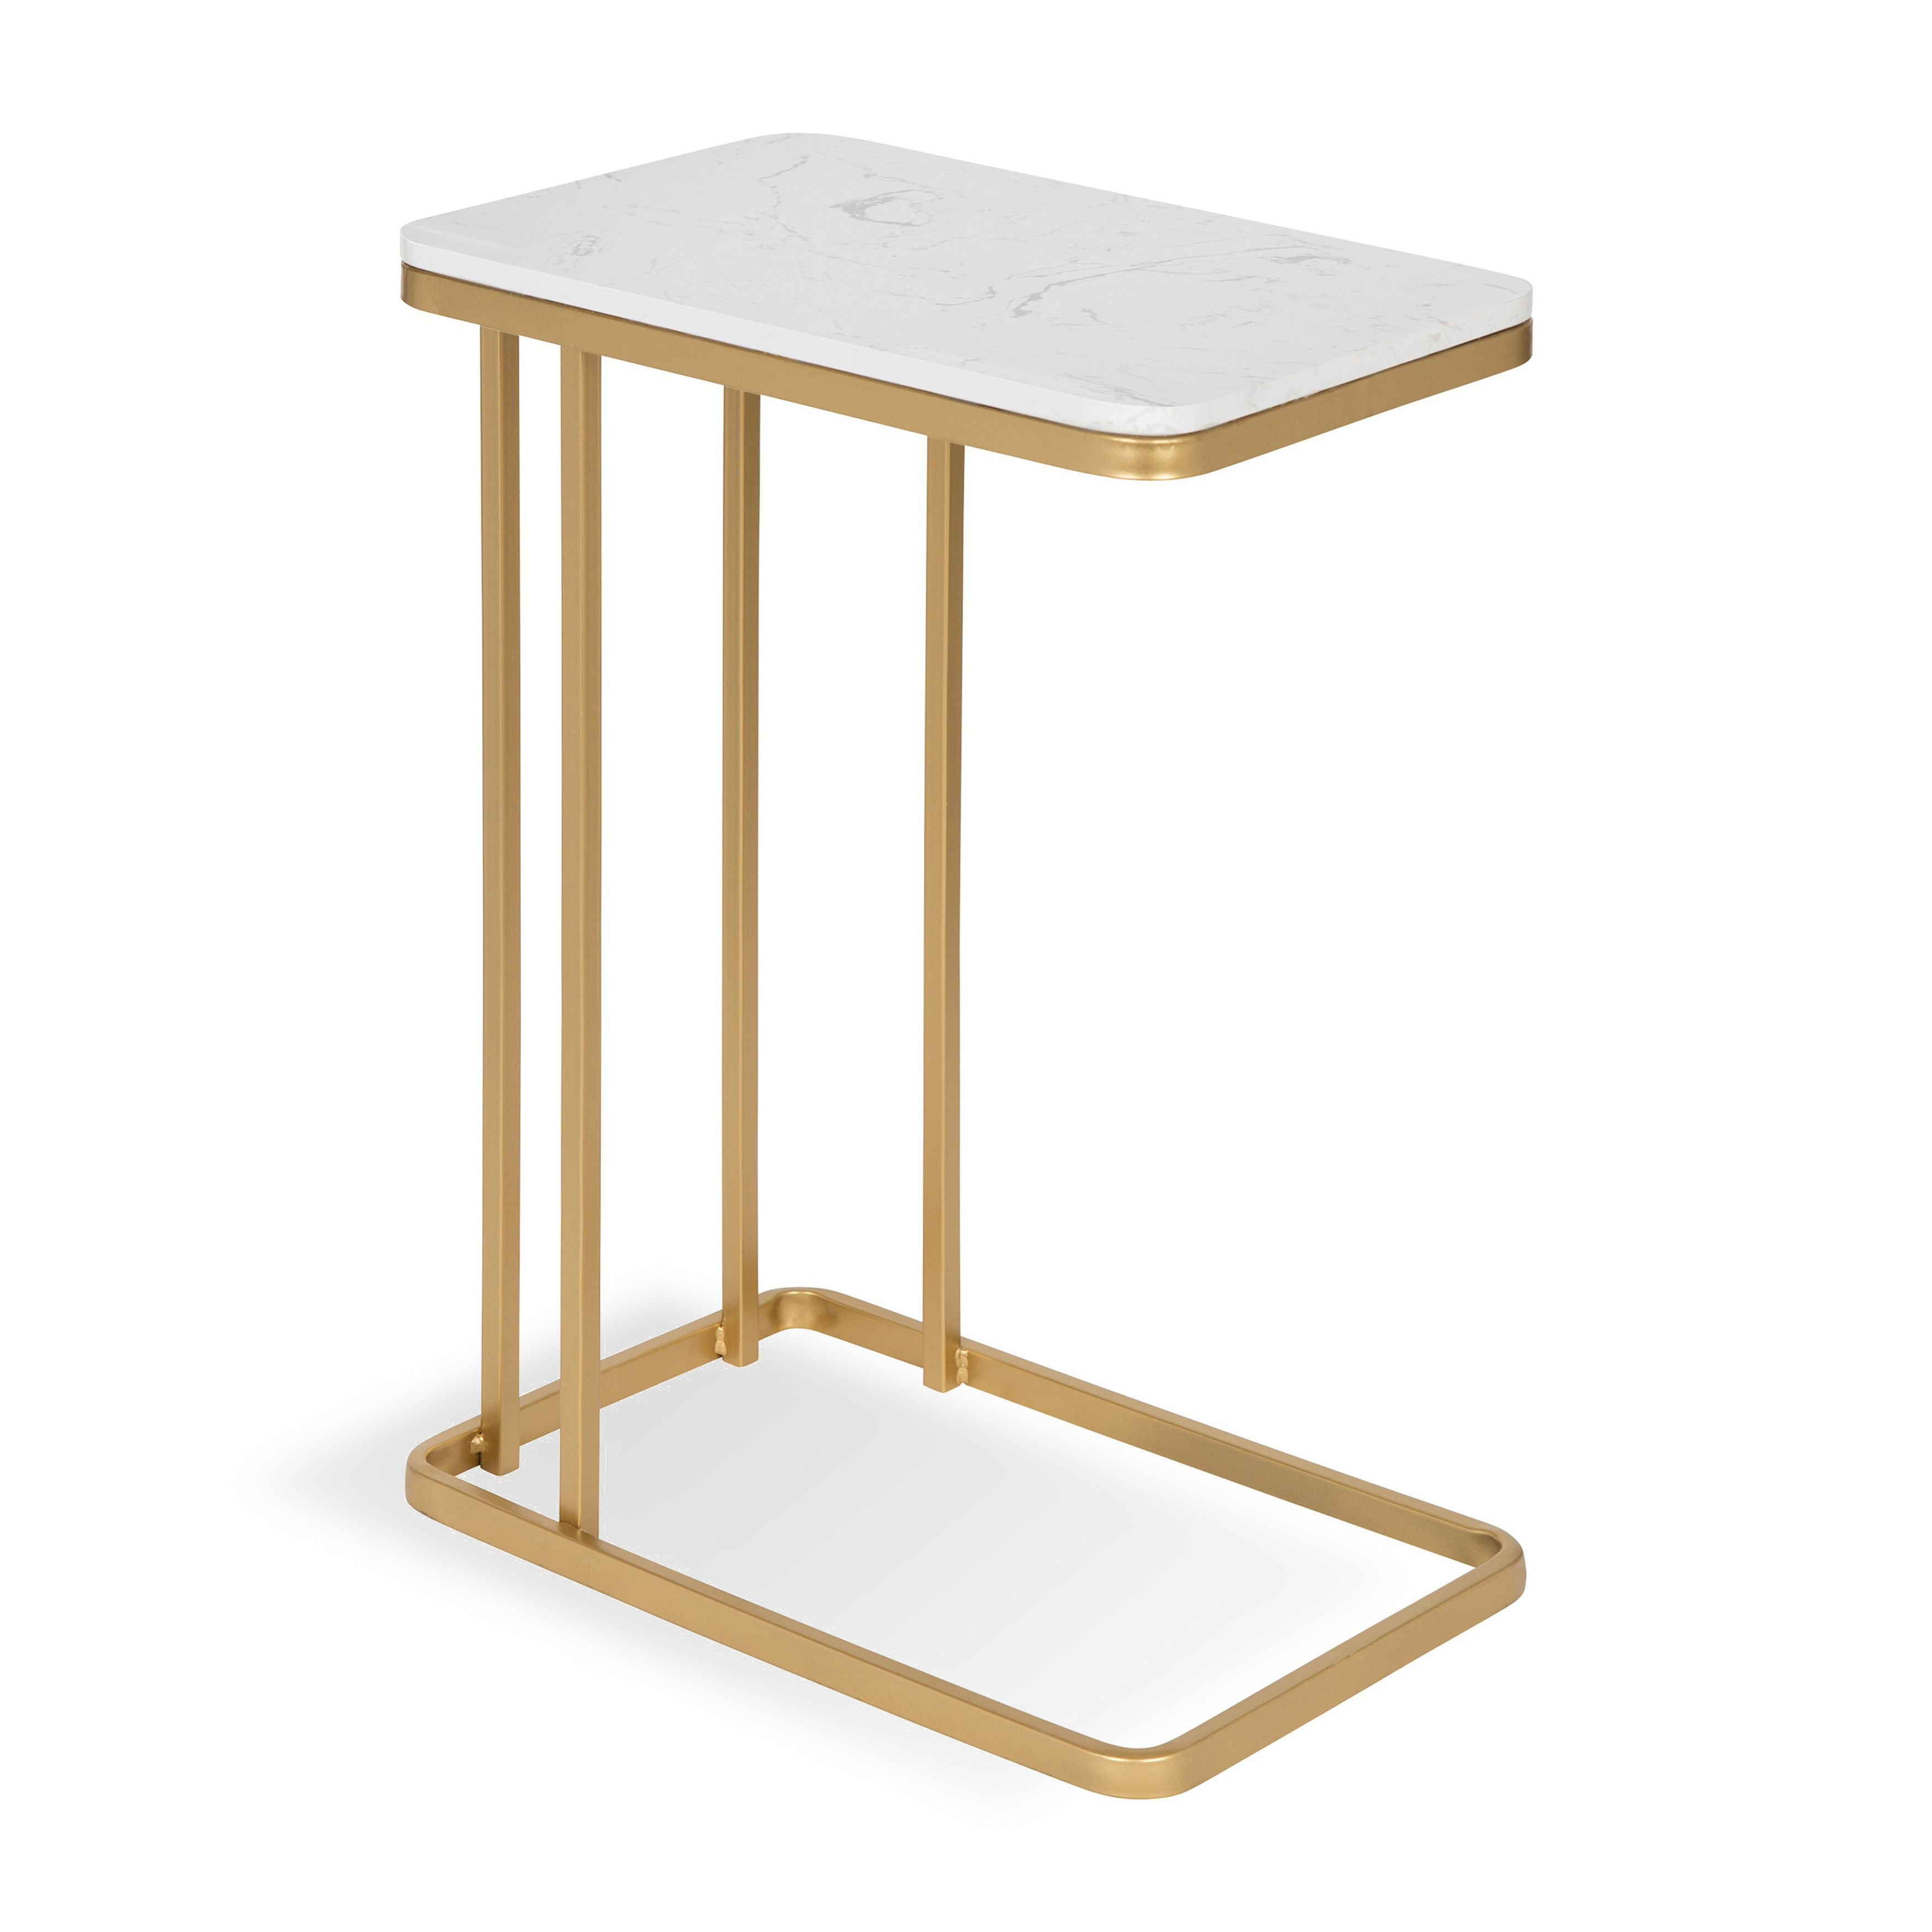 Kate and Laurel Credele Marble Sofa Side C-Table with Gold Metal Base - image 1 of 6